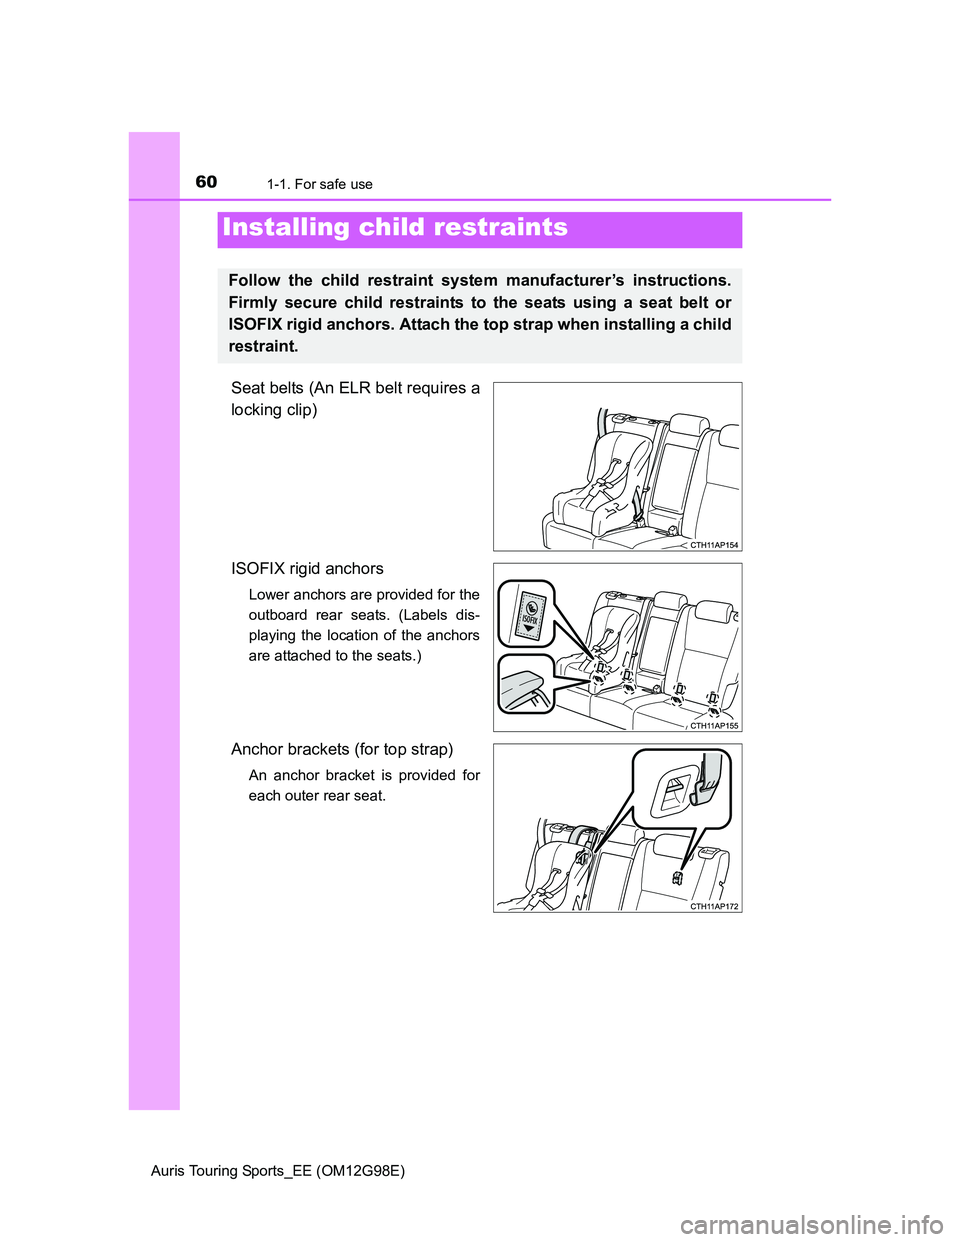 TOYOTA AURIS 2015  Owners Manual (in English) 601-1. For safe use
Auris Touring Sports_EE (OM12G98E)
Seat belts (An ELR belt requires a
locking clip)
ISOFIX rigid anchors 
Lower anchors are provided for the
outboard rear seats. (Labels dis-
playi